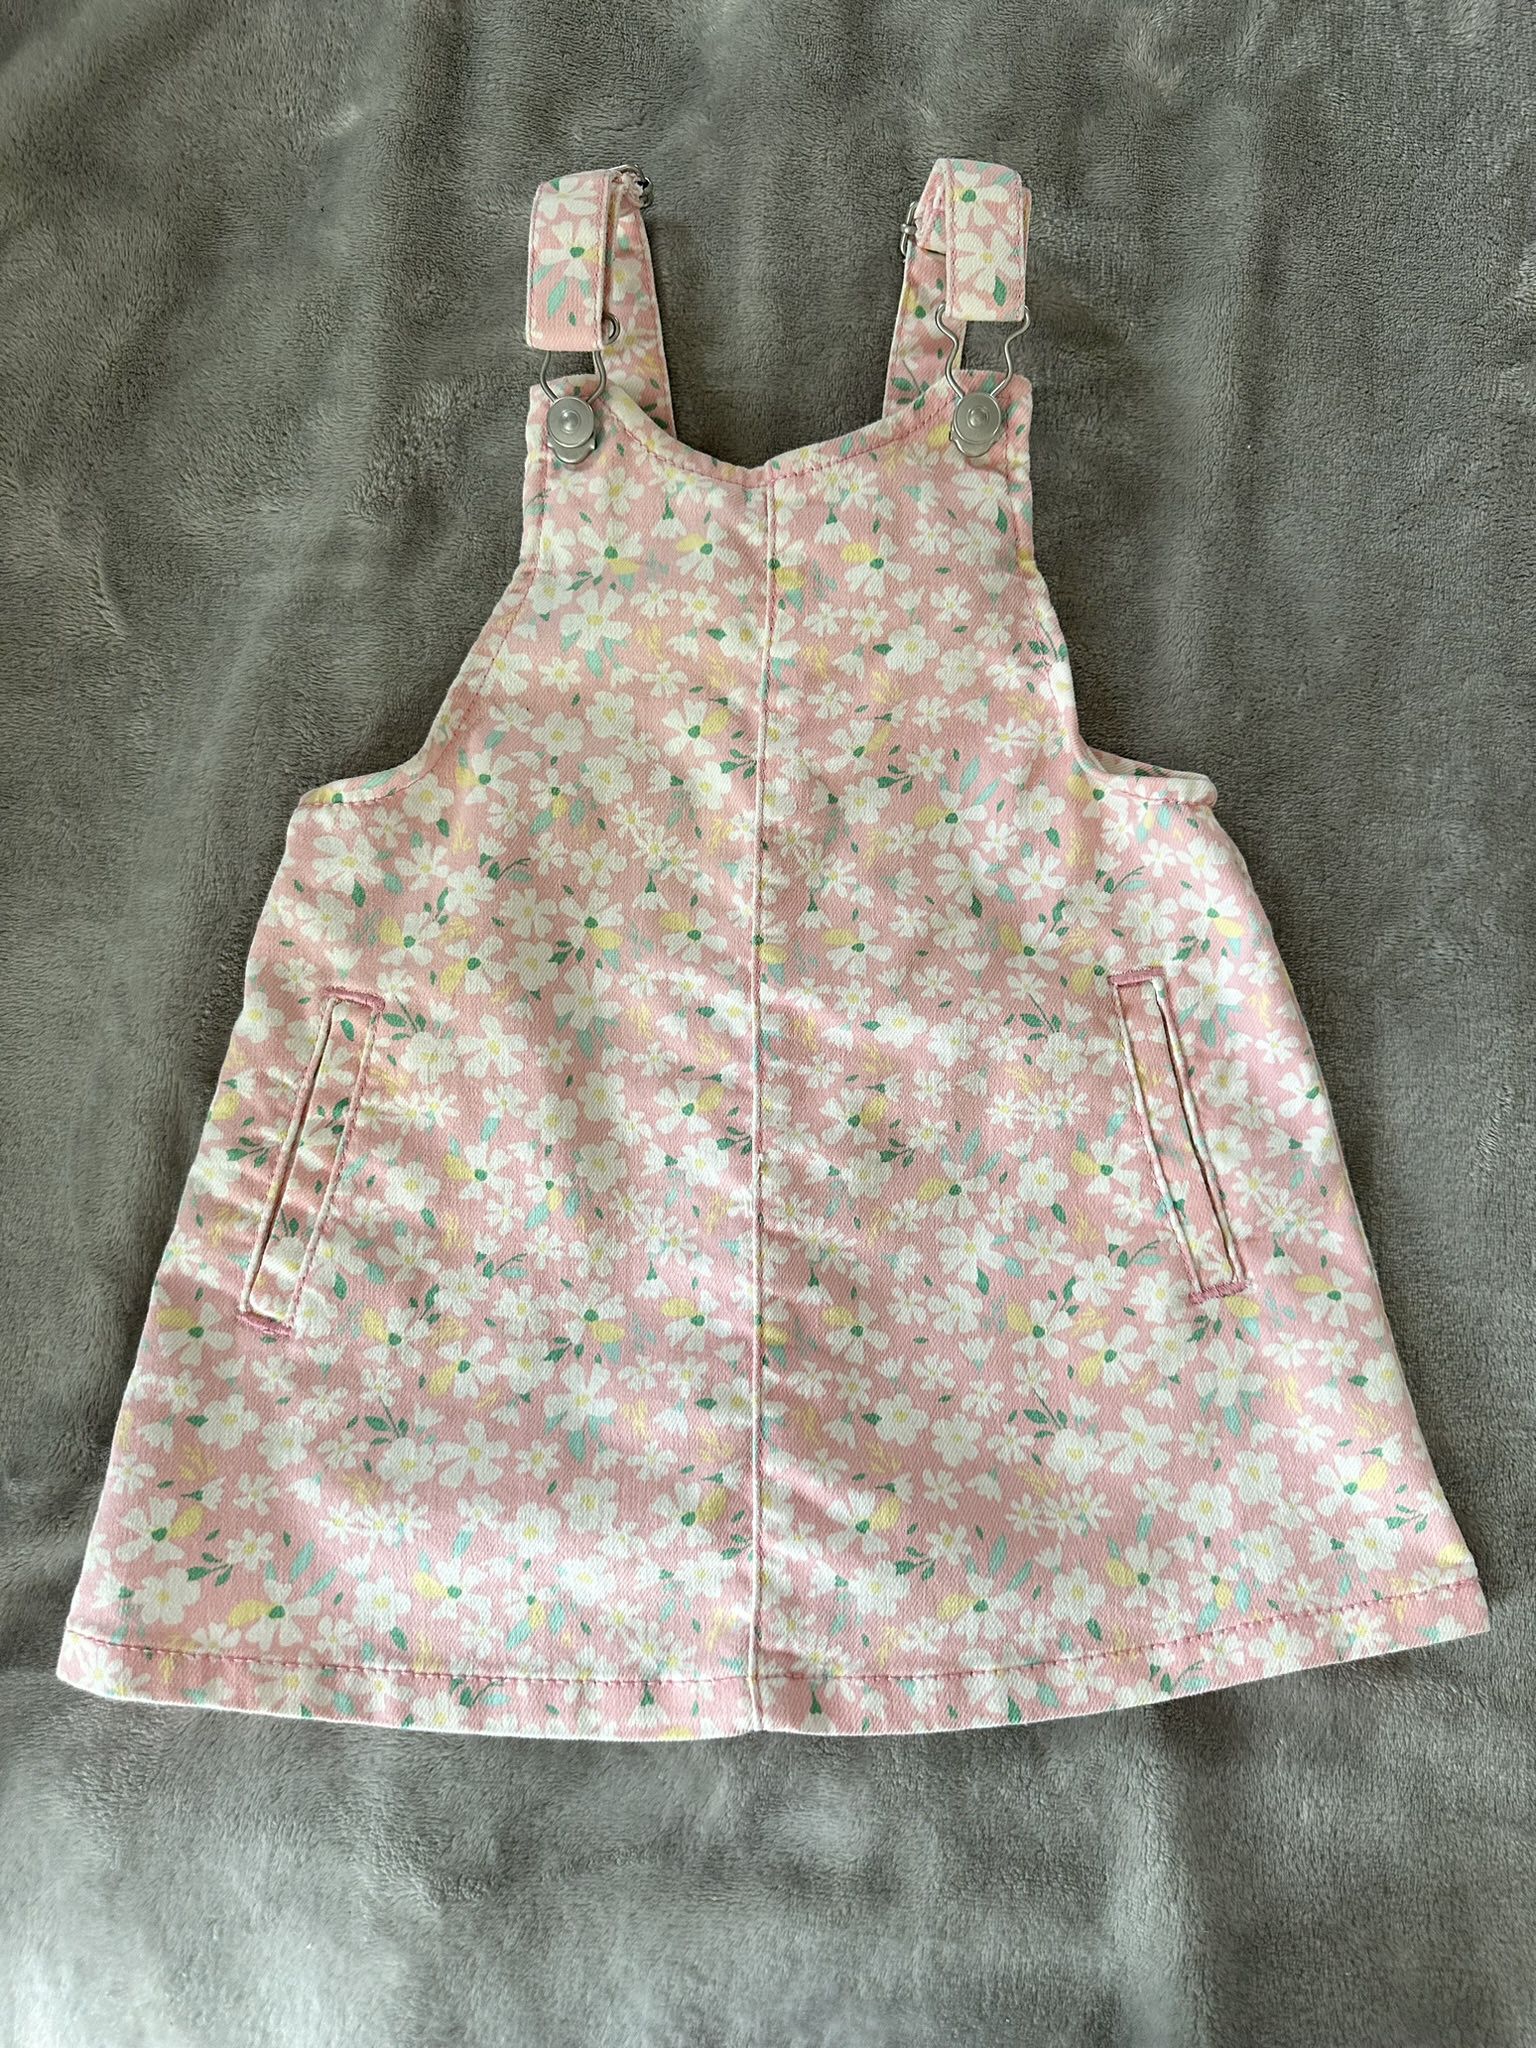 Used 2T Girl Overall Dress - $5